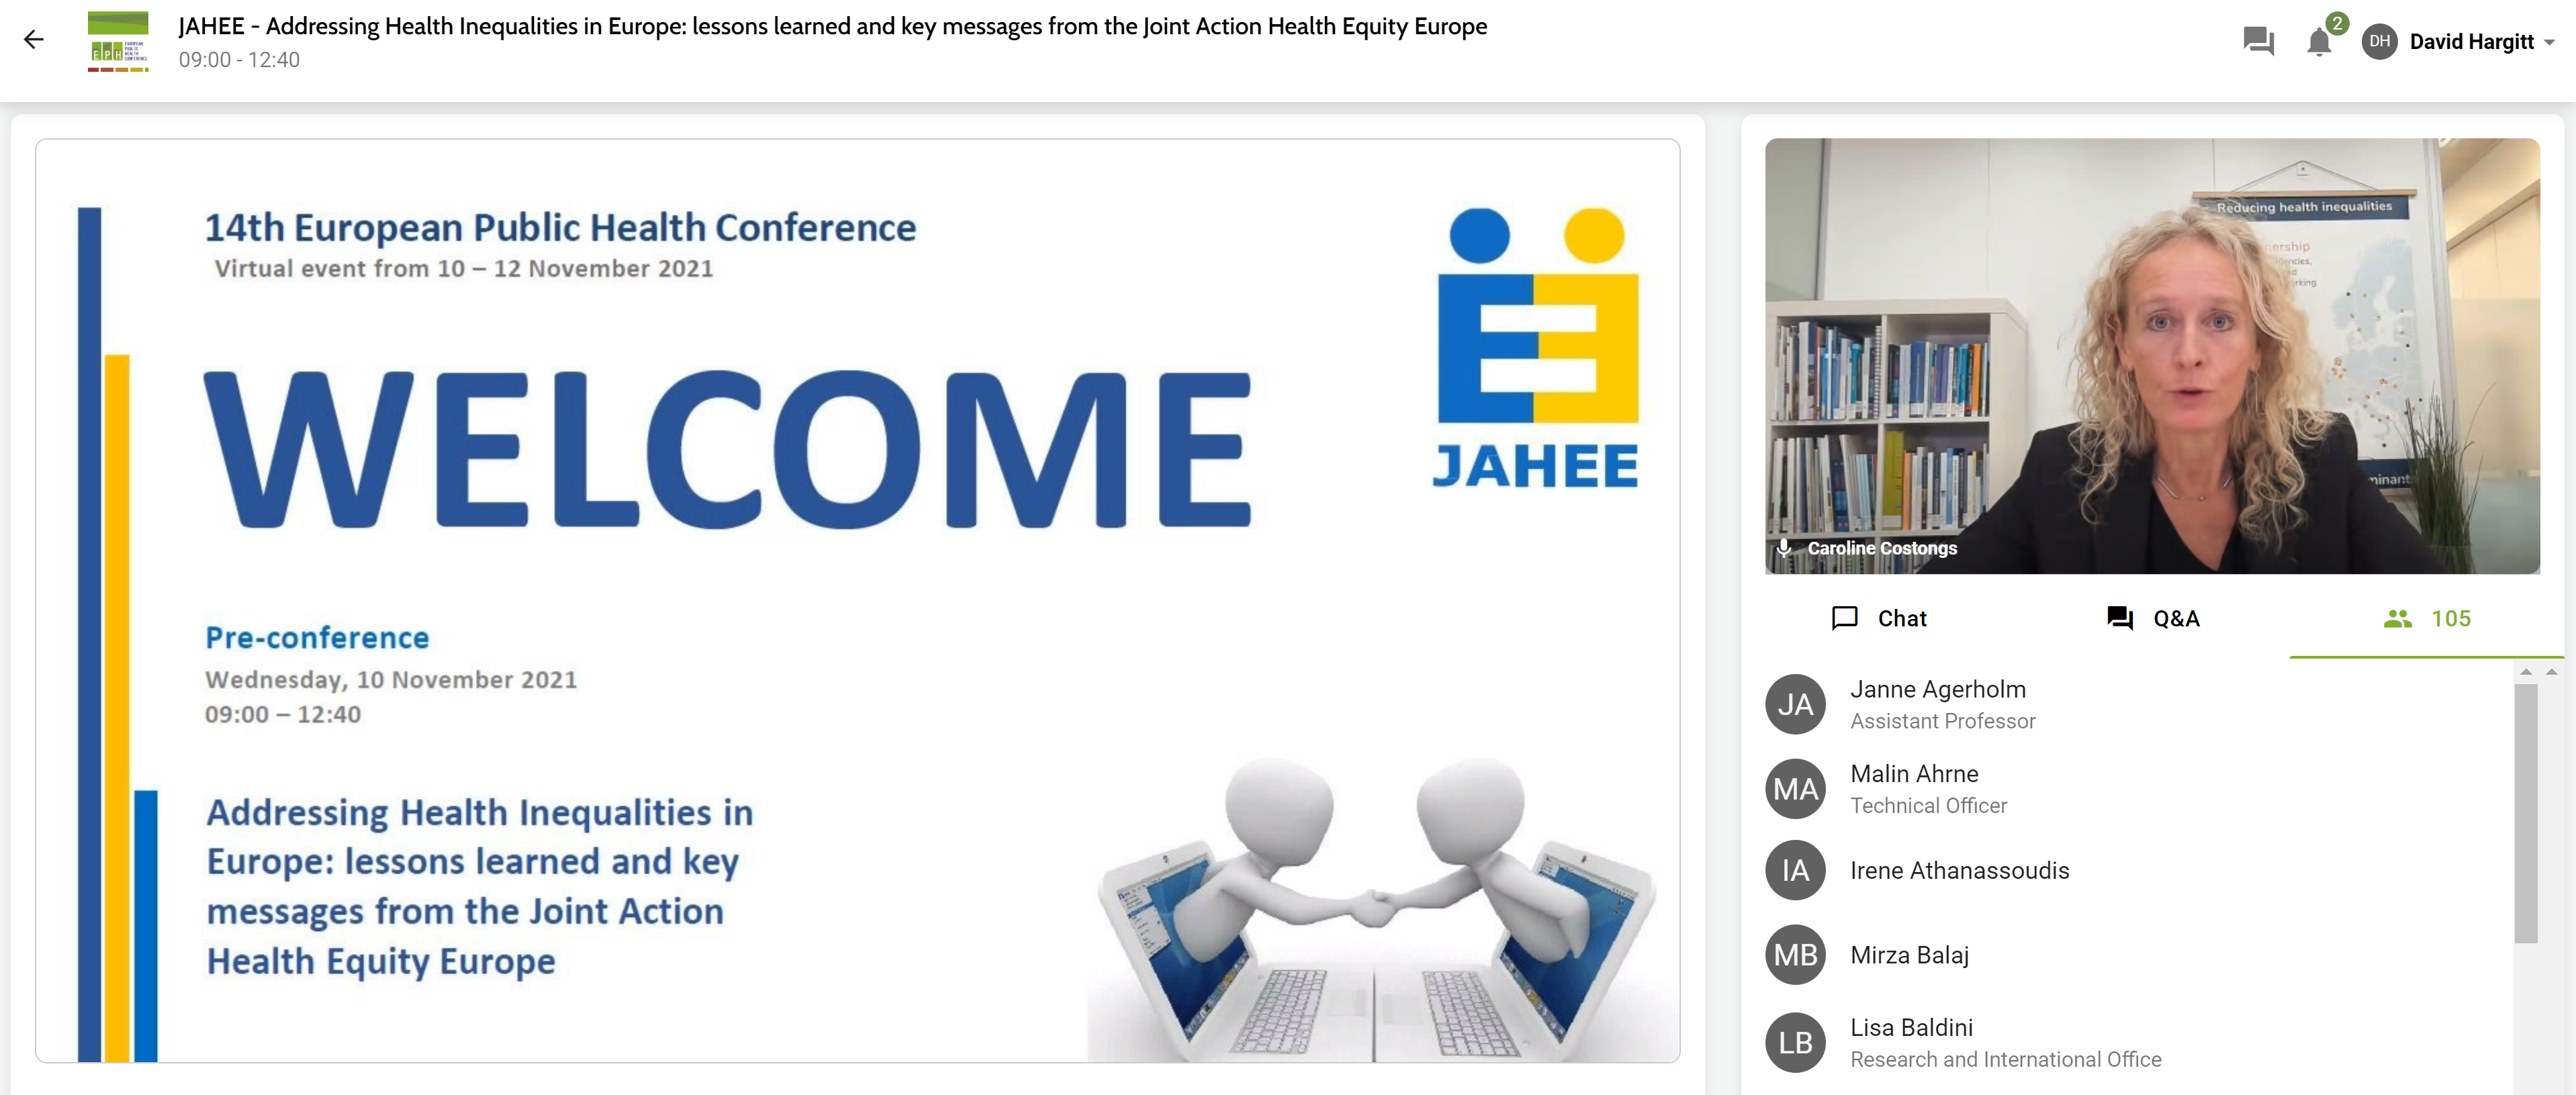 EuroHealthNet Director Caroline Costongs opens the JAHEE pre-conference on addressing health inequalities in Europe during the 2021 European Public Health Conference. (Click to enlarge)